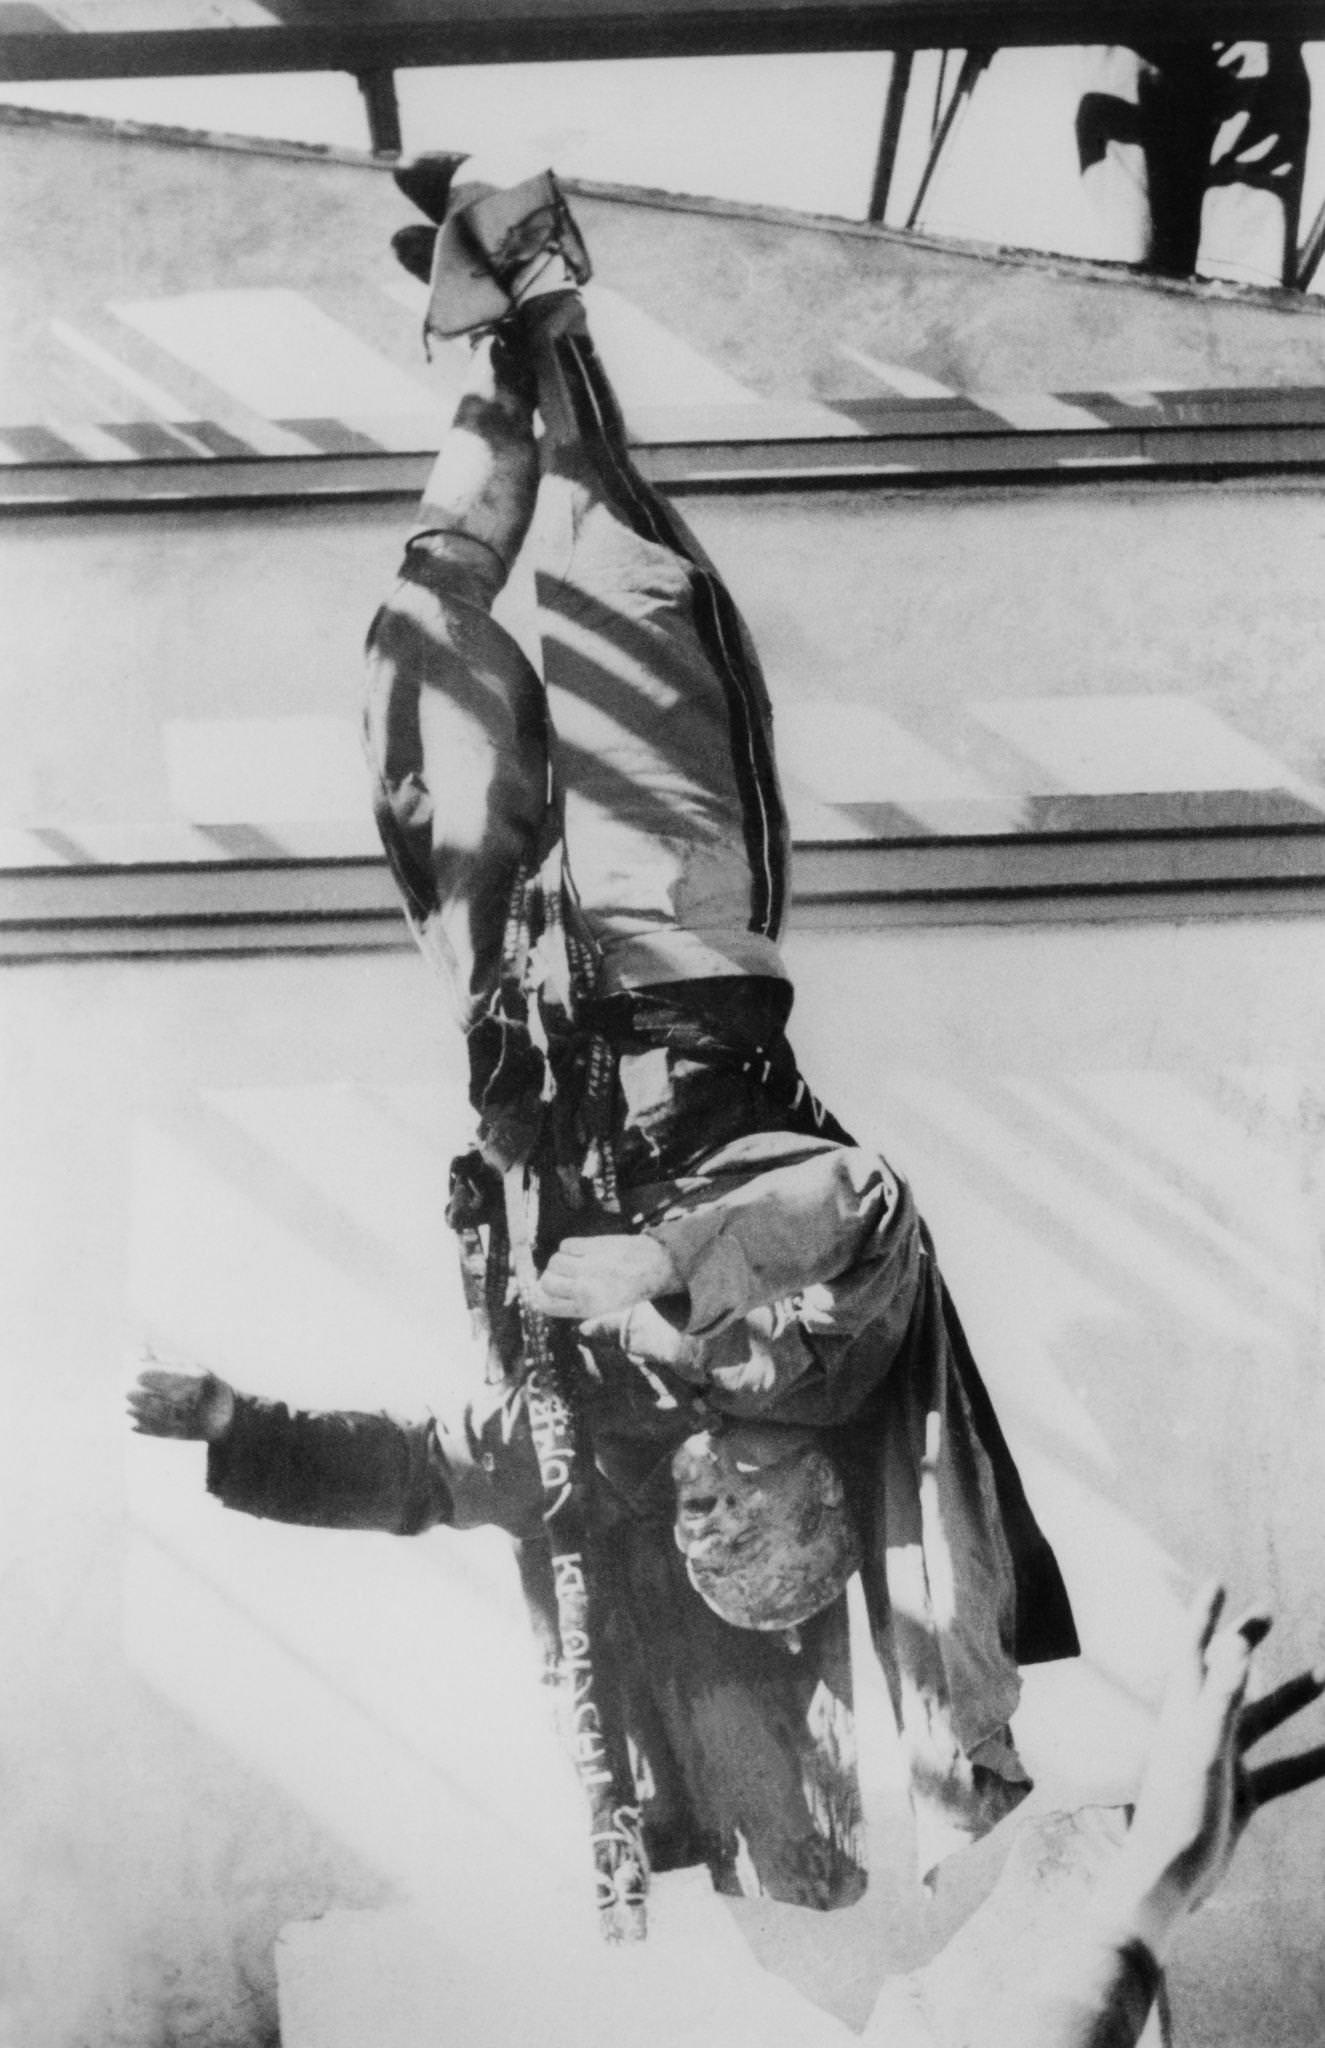 Mussolini's Corpse Displayed at Piazzale Loretto After Execution in Milan, 1945